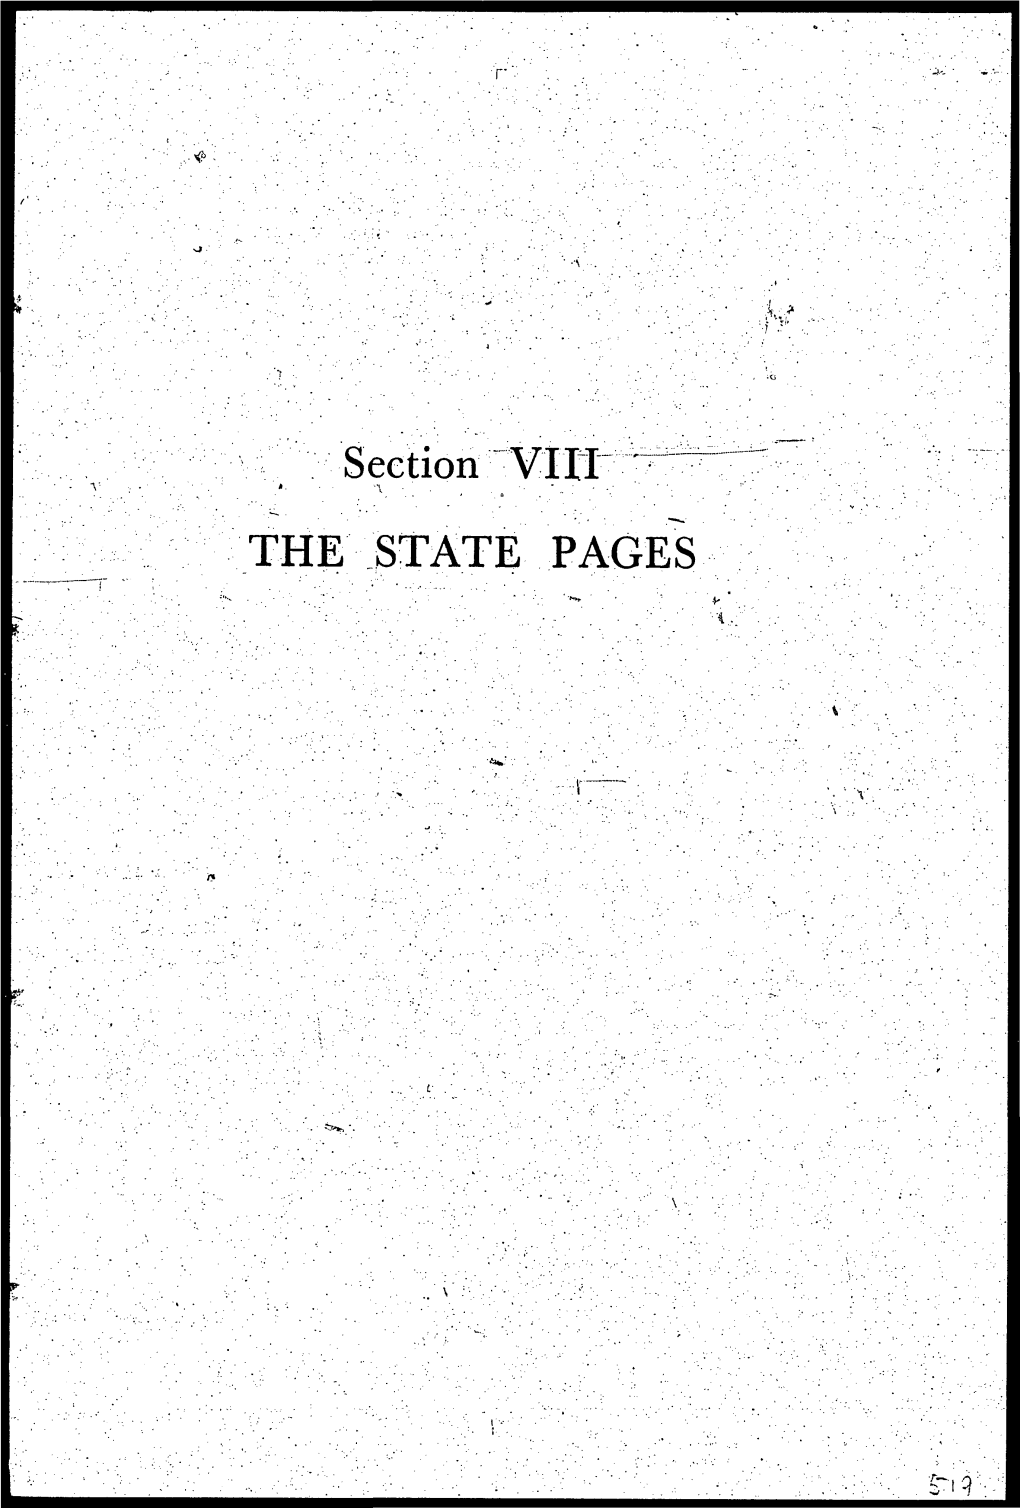 The State Pages